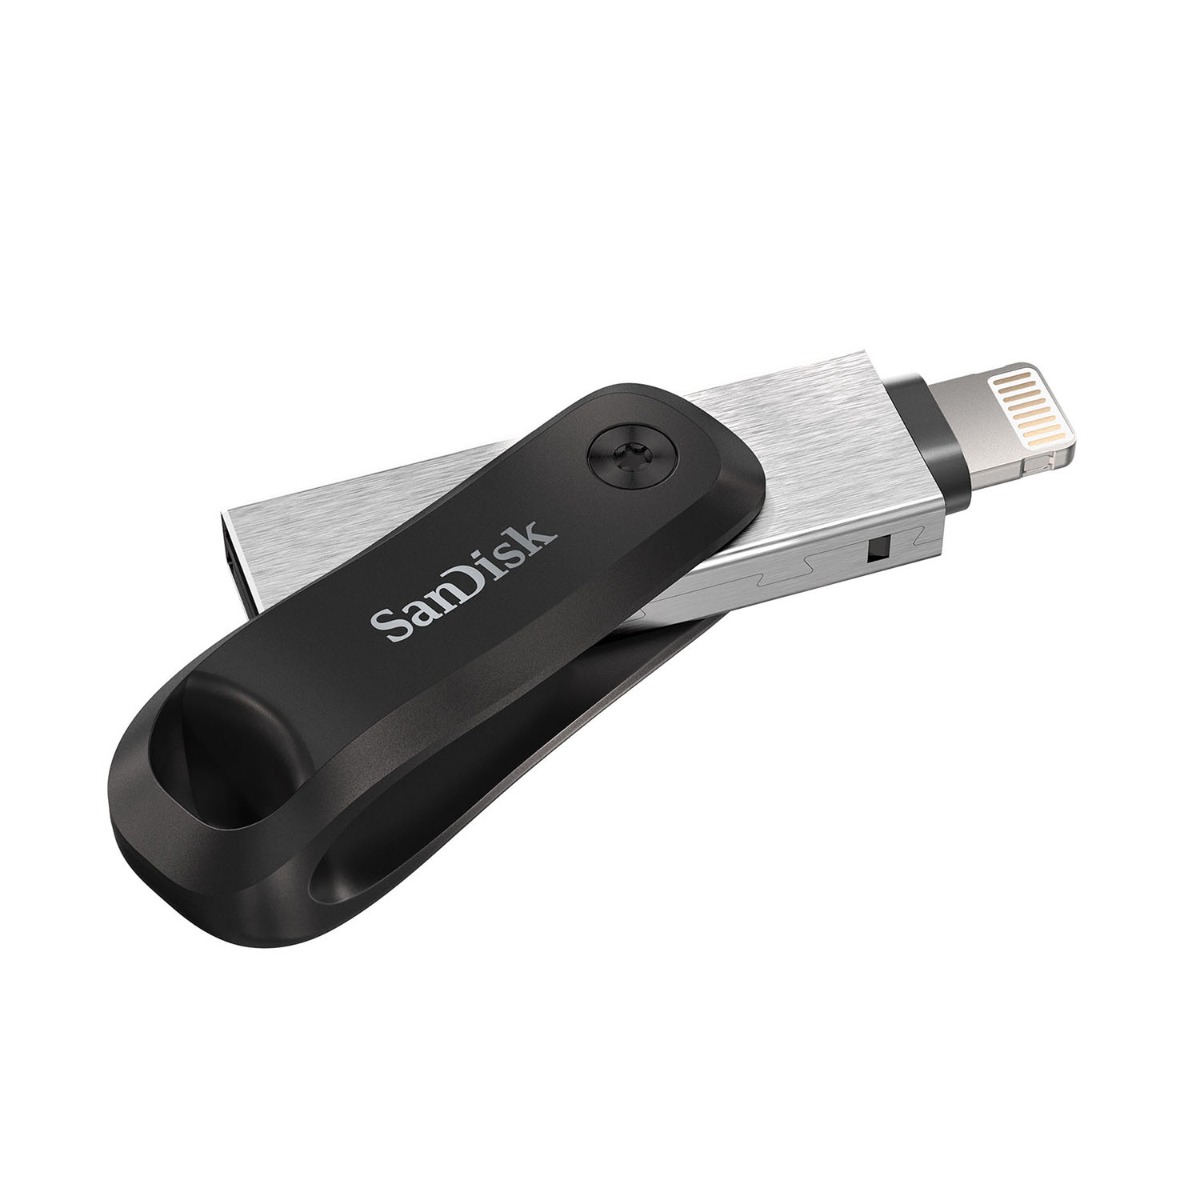 SanDisk 256GB iXpand Flash Drive Go with Lightning and USB 3.0 Connectors